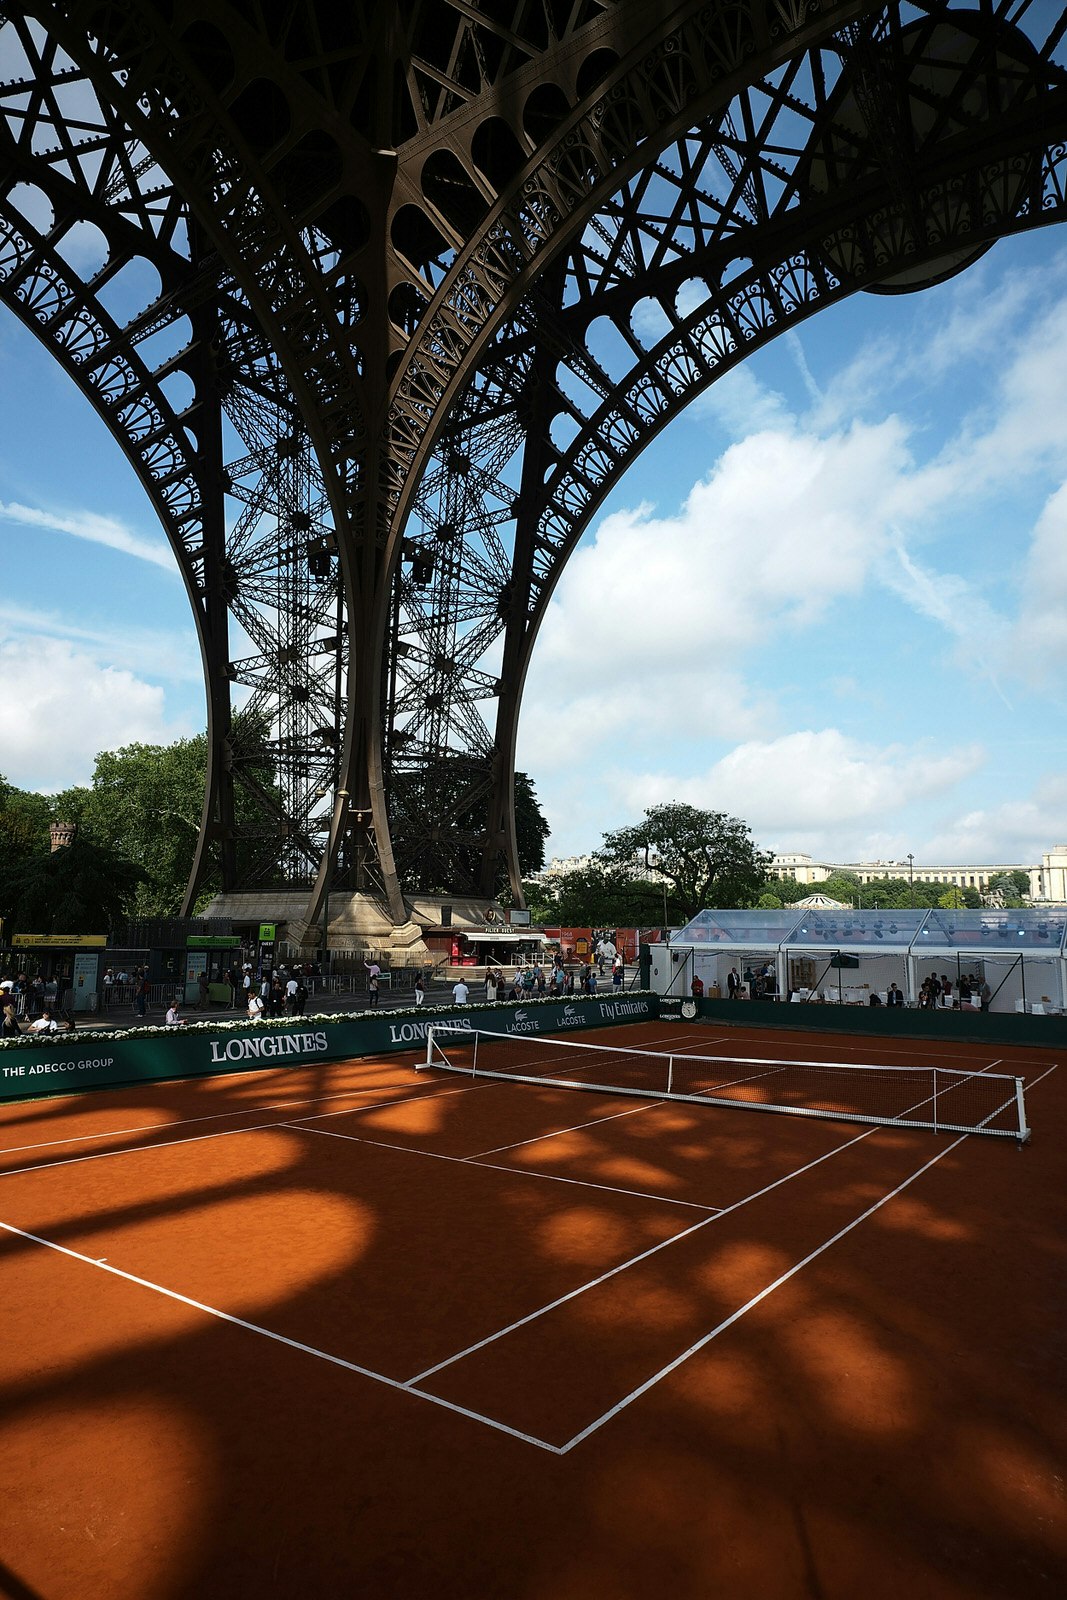 A red clay tennis court, with crisp white lines, sits beneath the elegant iron arches of the Eiffel Tower's large feet; ornate shadows cast by the steel structure spread across the court, with a blue sky in the background